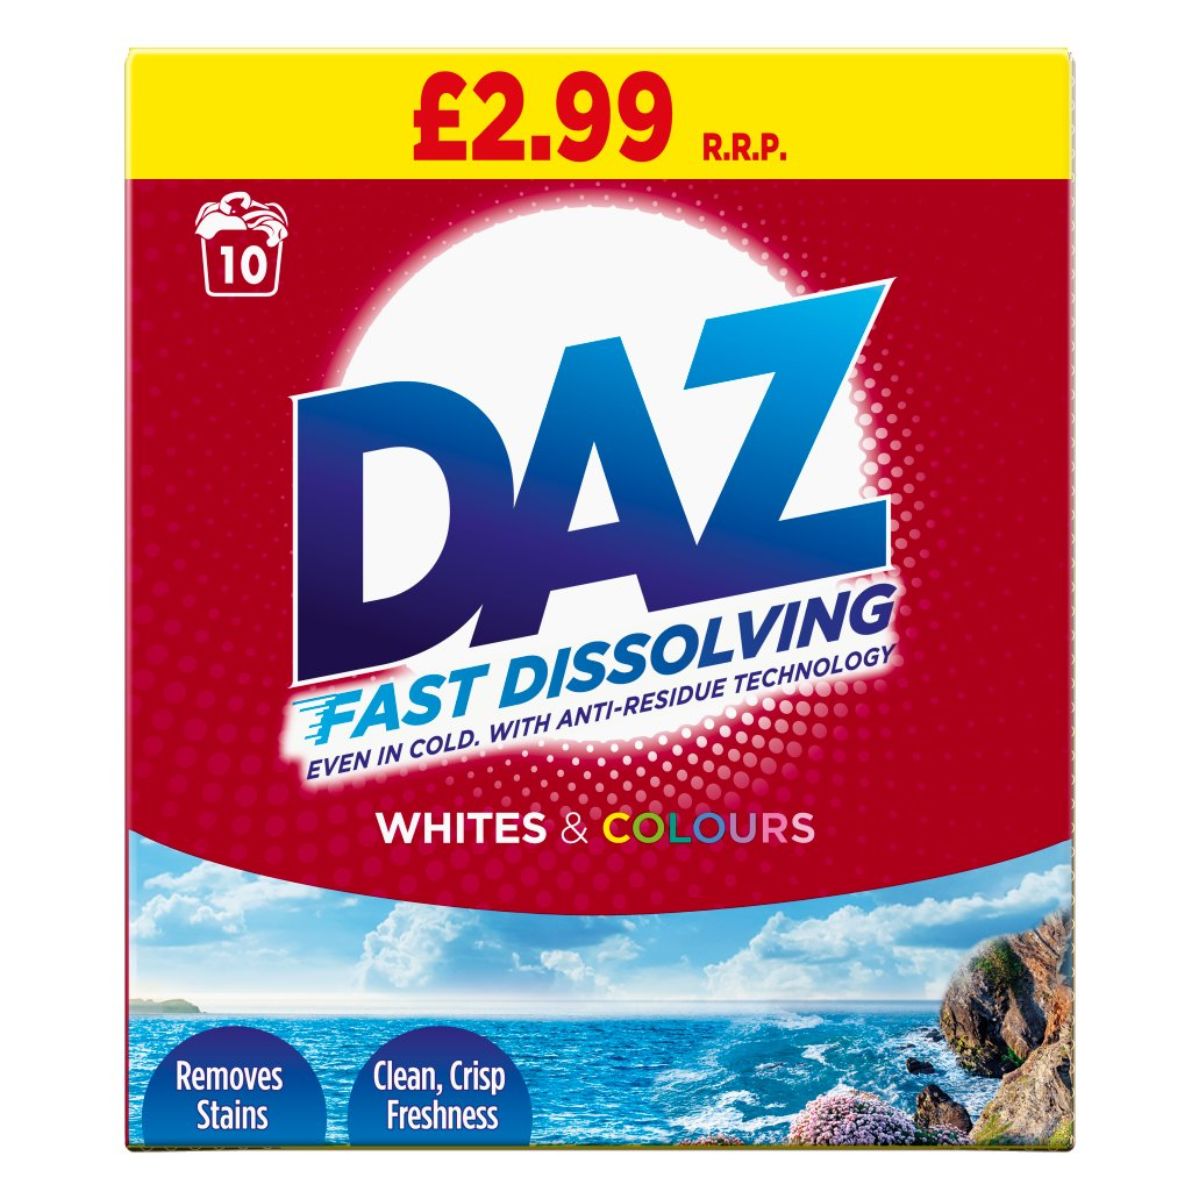 Box of Daz Washing Powder - 600g, advertising fast dissolving action for whites and colors, priced at £2.99.